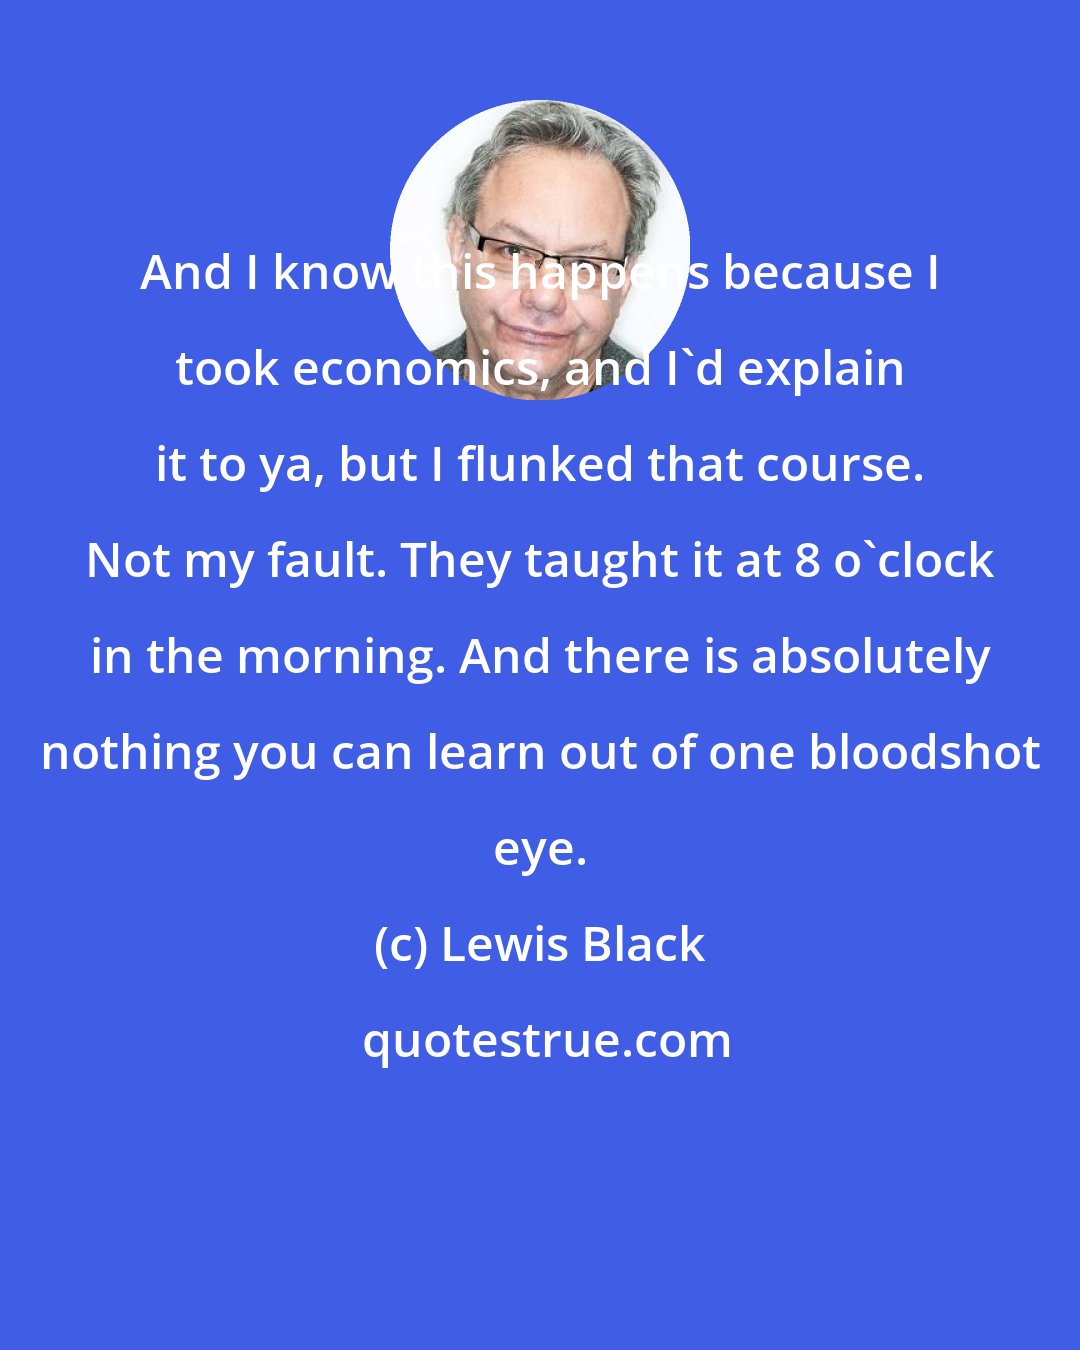 Lewis Black: And I know this happens because I took economics, and I'd explain it to ya, but I flunked that course. Not my fault. They taught it at 8 o'clock in the morning. And there is absolutely nothing you can learn out of one bloodshot eye.